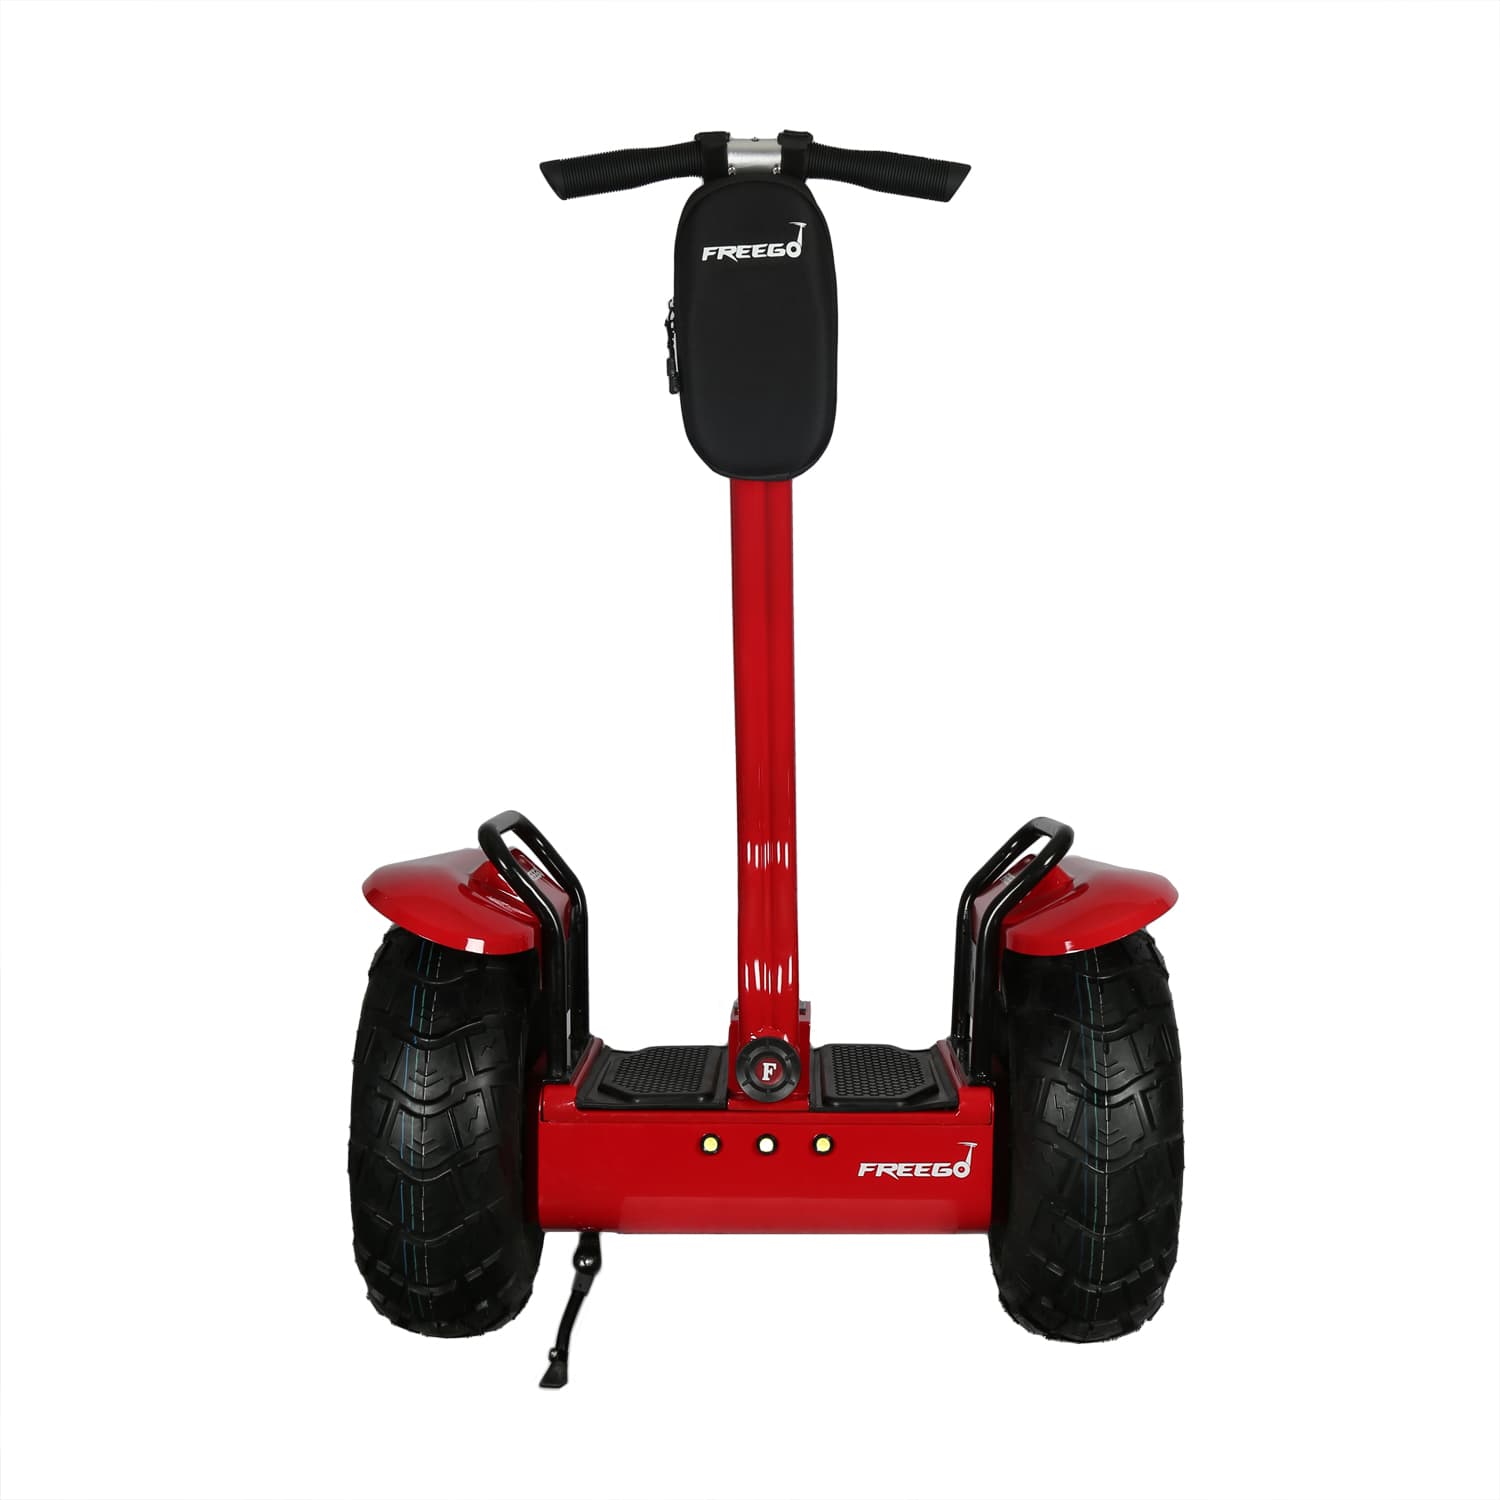 Freego Self-Balancing Two-Wheeler Electric Scooter Segway - F3 Off-Road Model